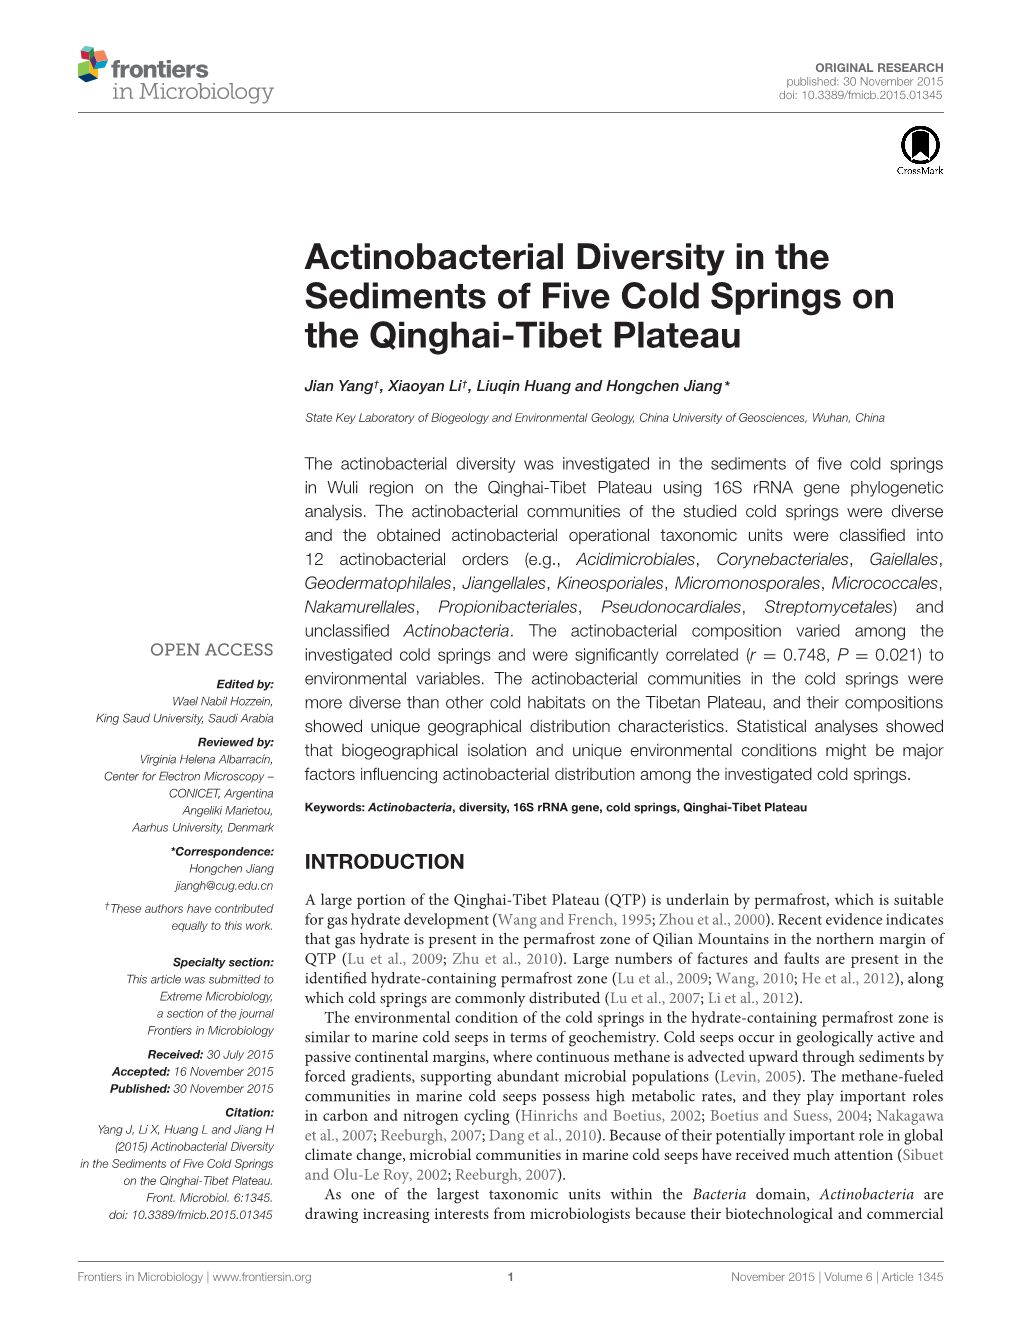 Actinobacterial Diversity in the Sediments of Five Cold Springs on the Qinghai-Tibet Plateau